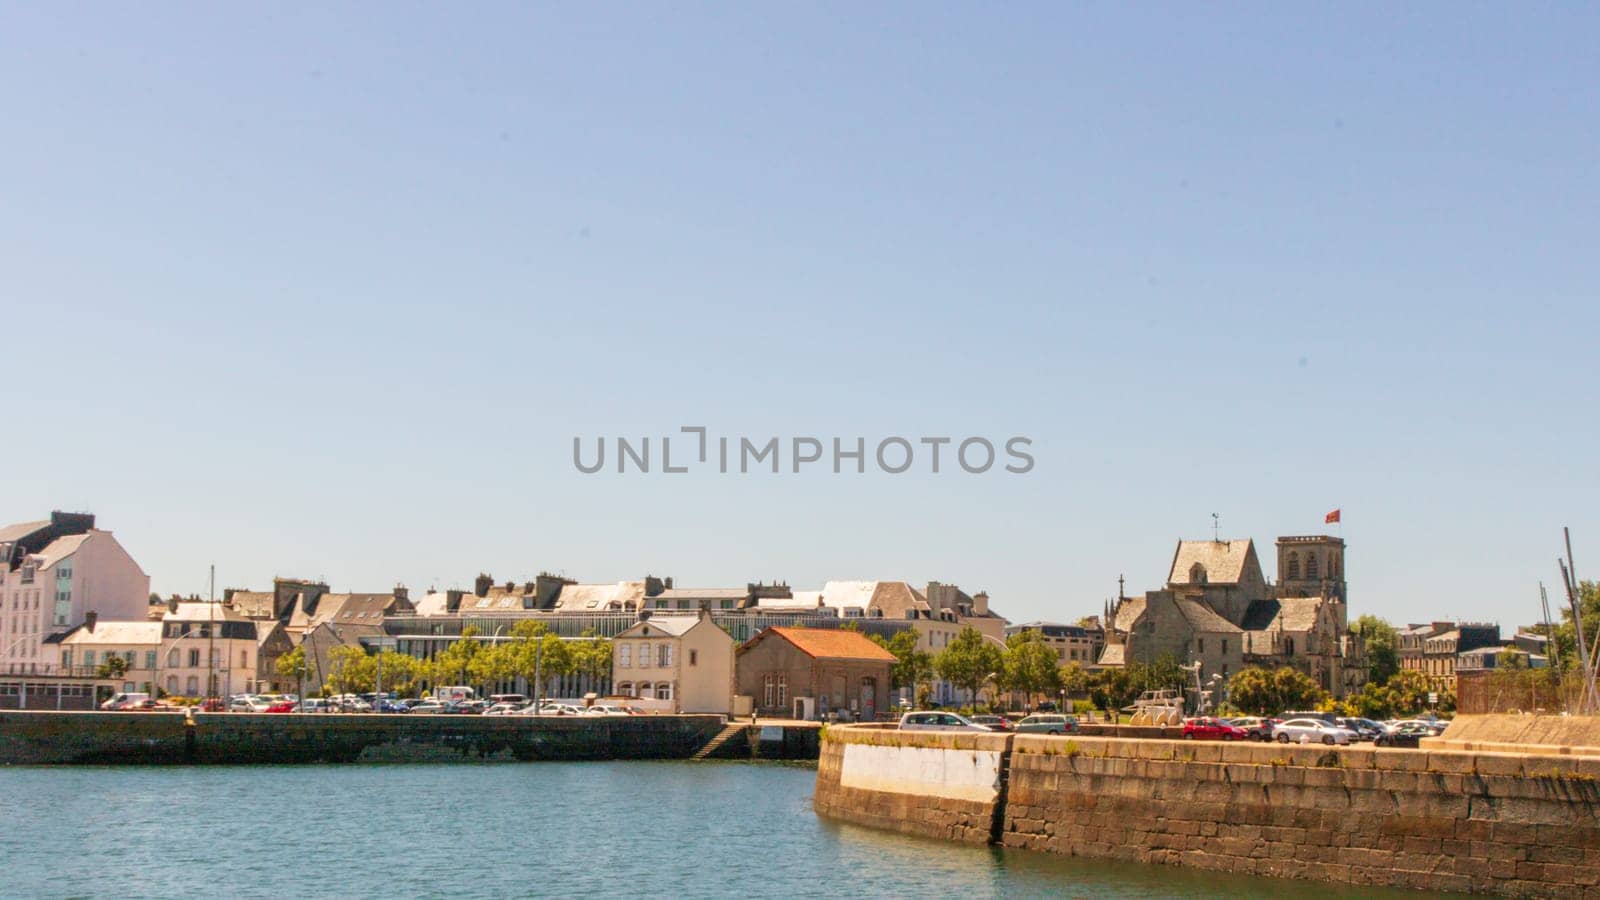 Cherbourg Harbor in Normandy, France. Peninsula of Cotentin